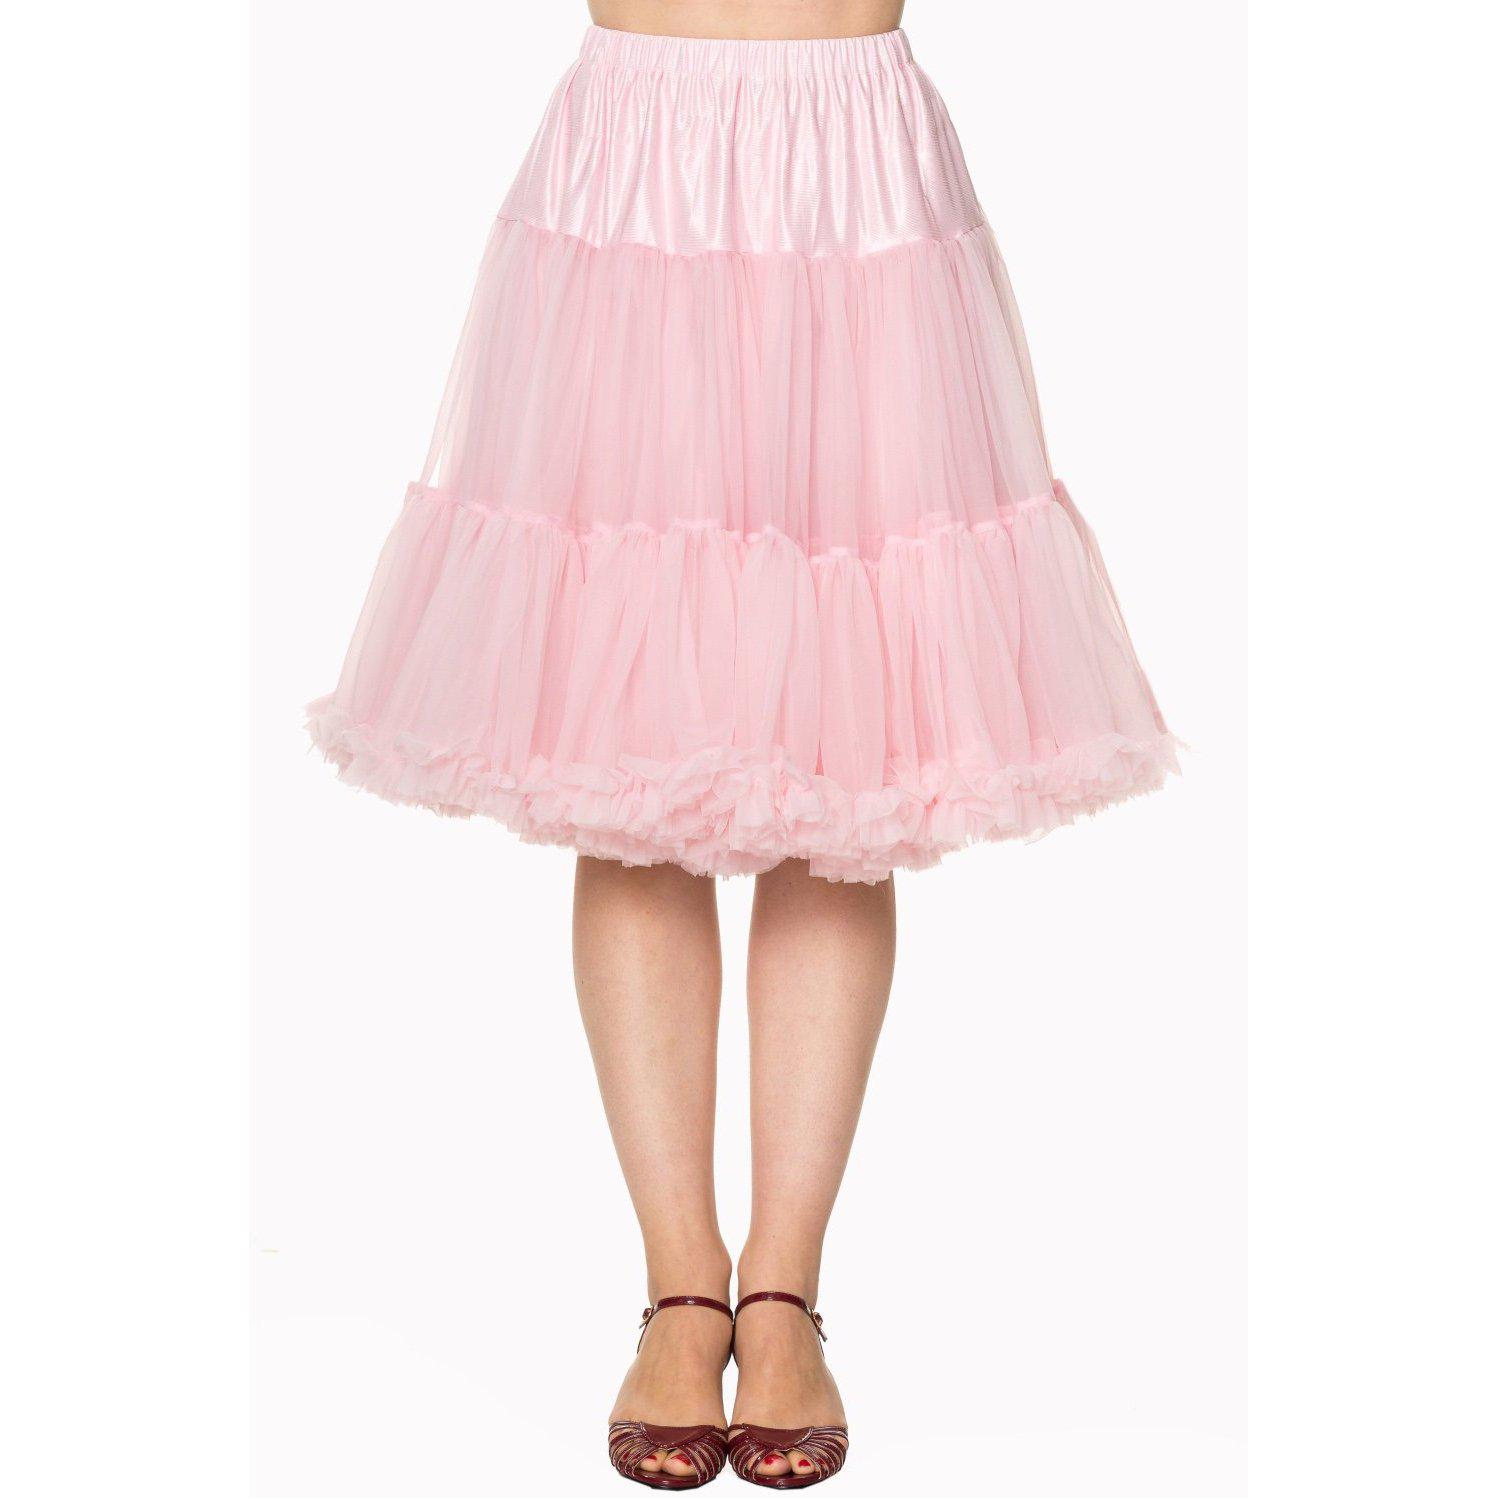 Solid Color Satin Petticoat in Old Rose : UUX495